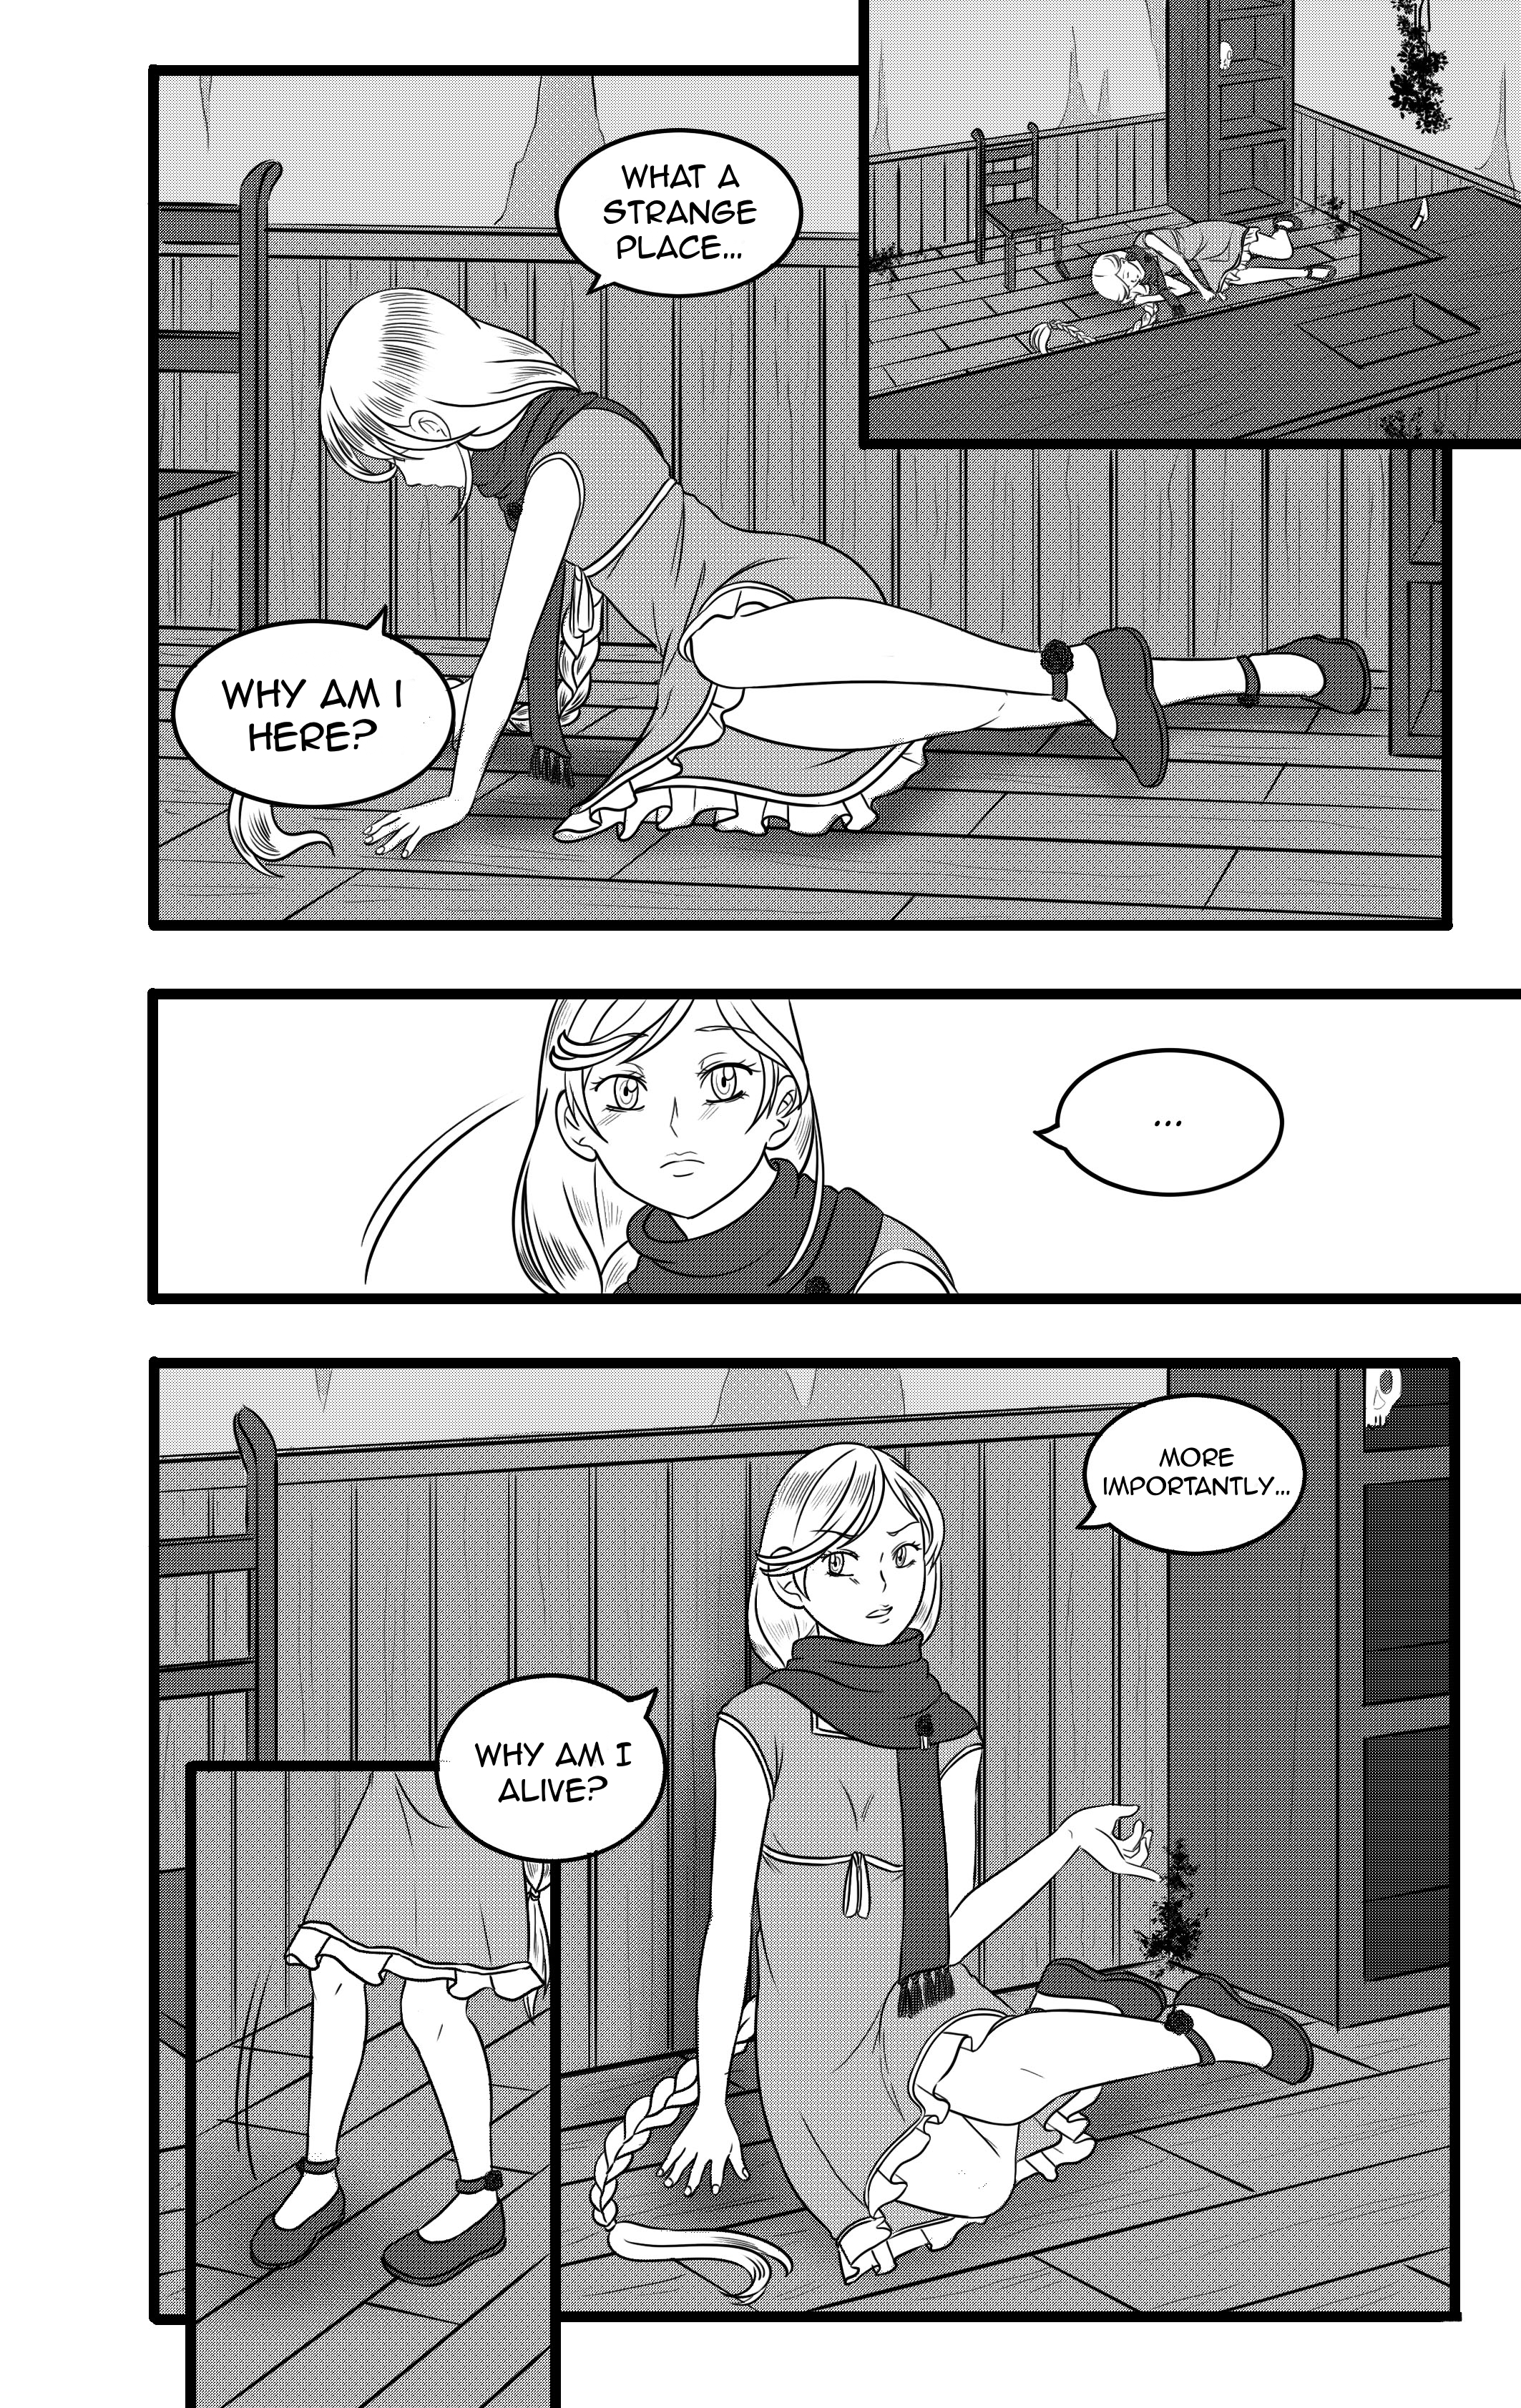 While chapter 6 - page 2